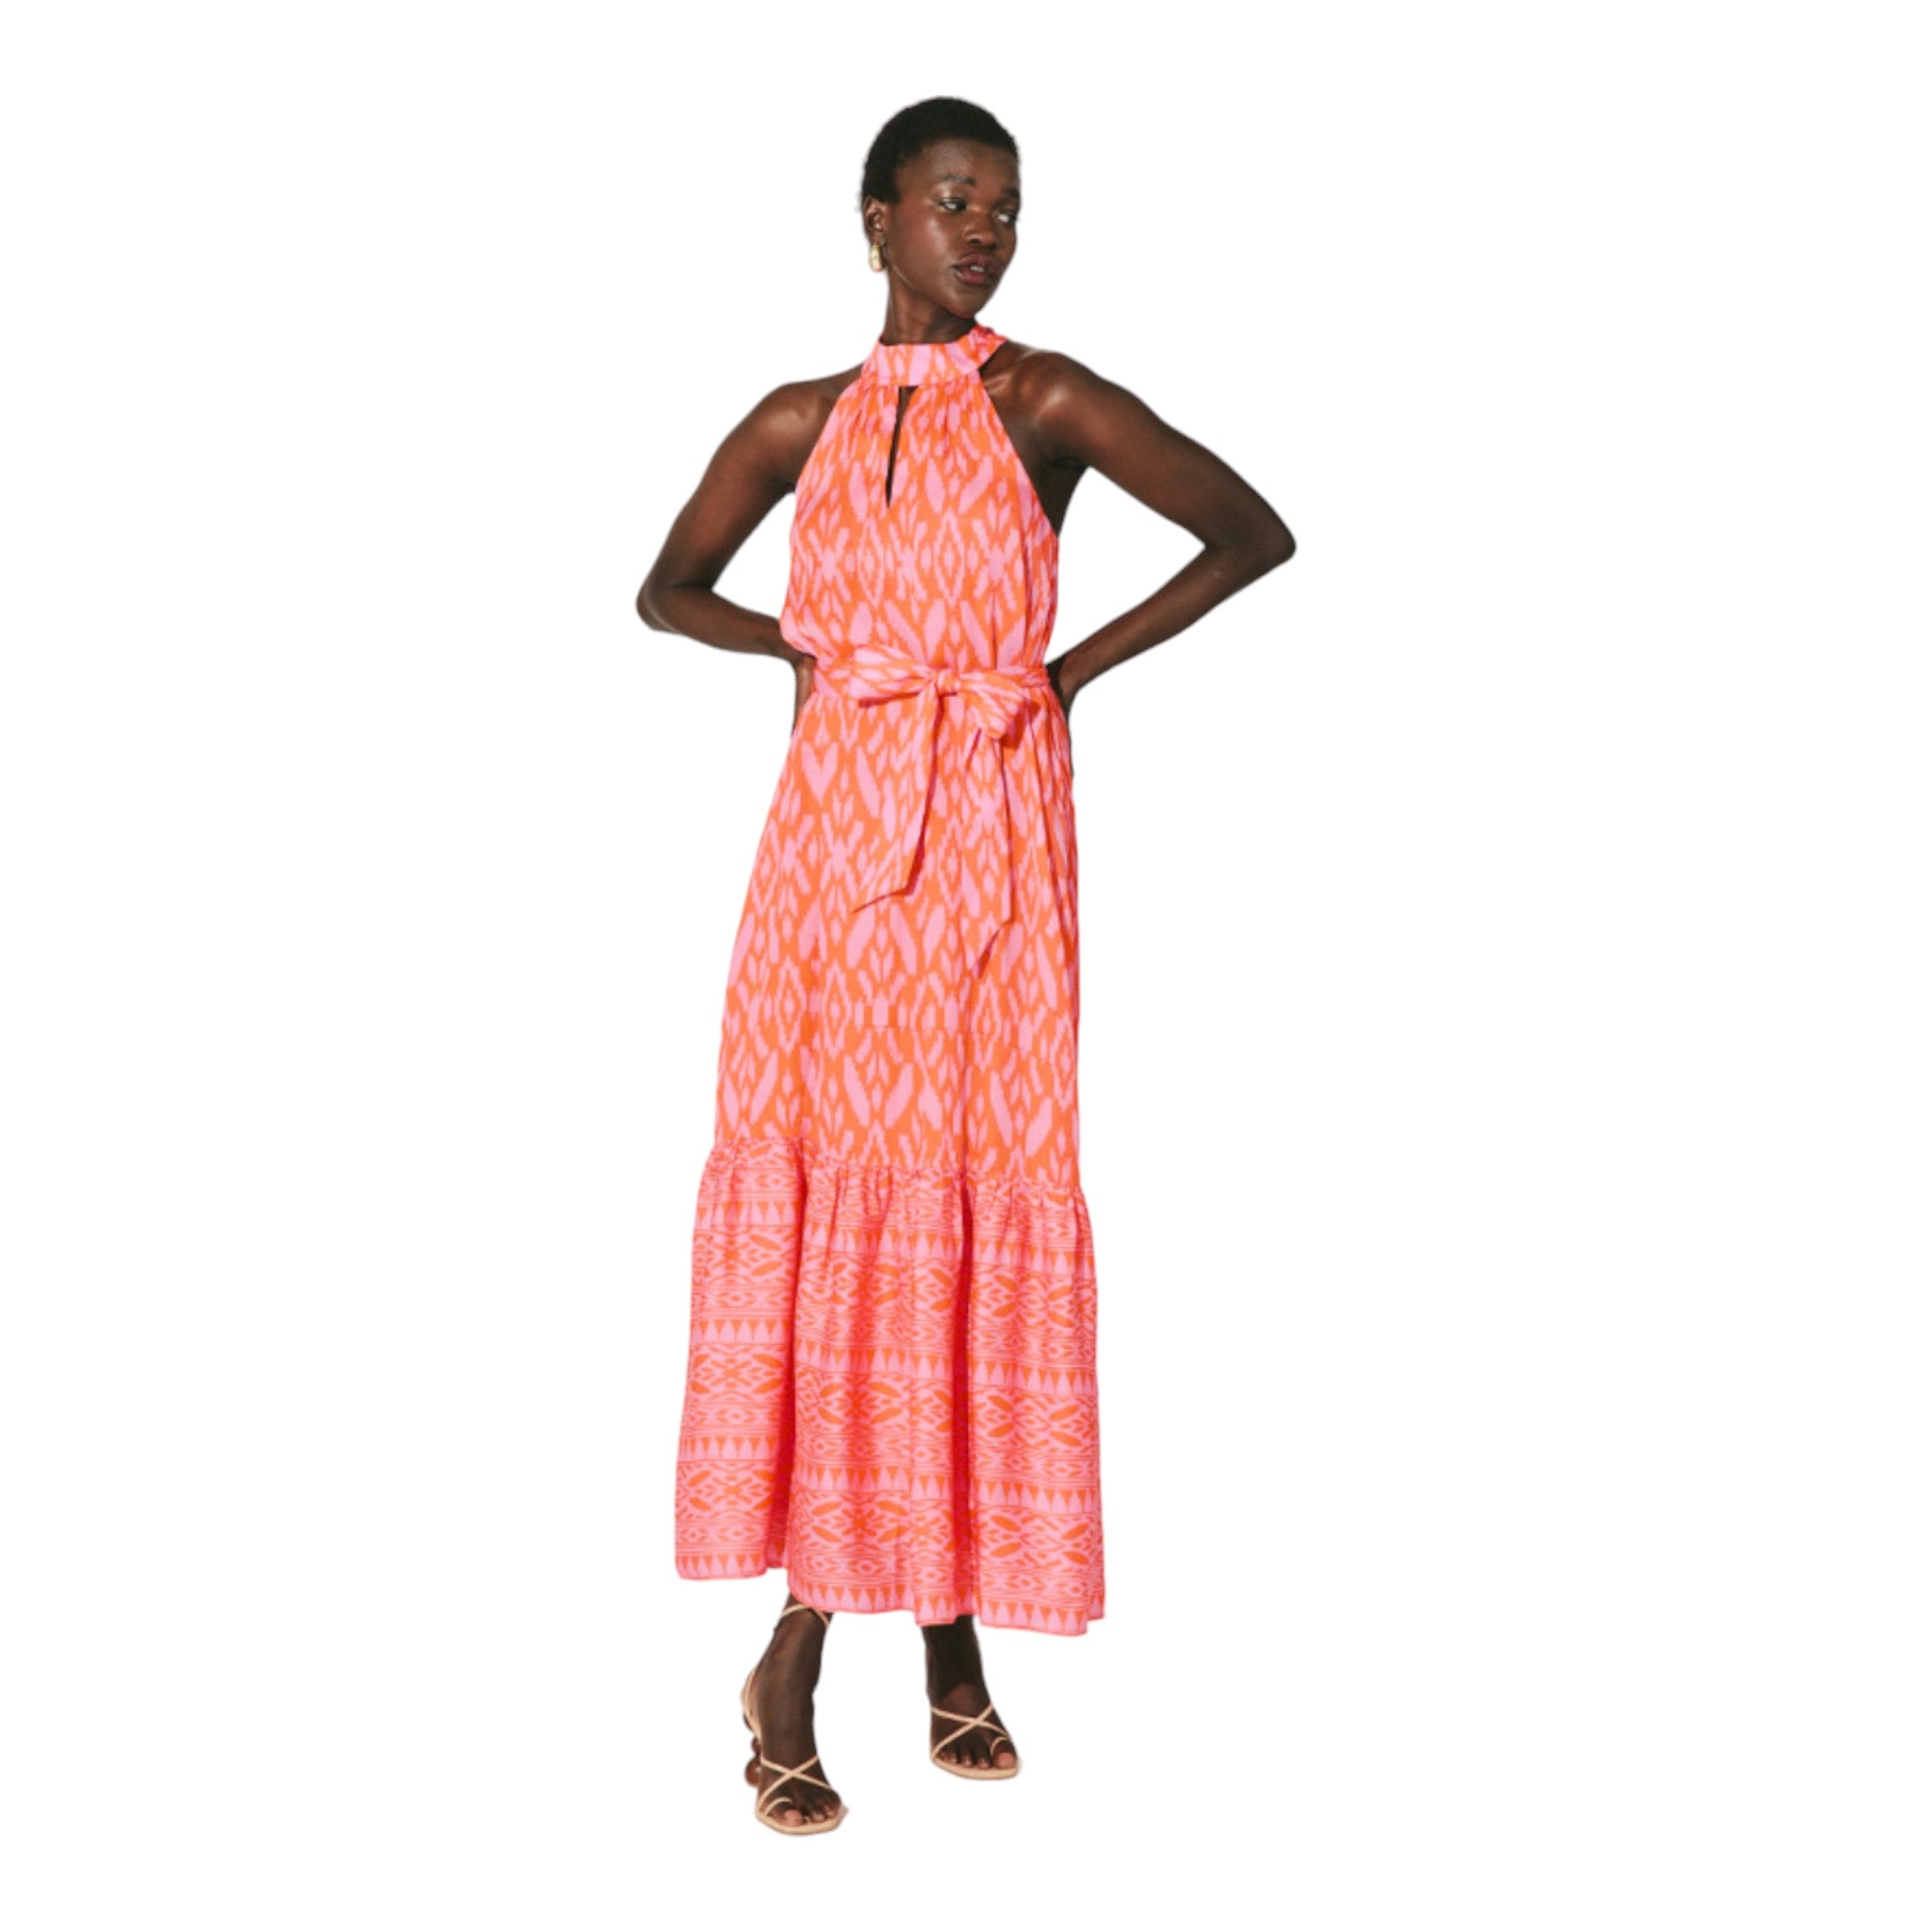 halter style maxi dress with a ruffle hem featuring a pink and orange ikat print with a keyhole cutout detail and tie neck and belted waist